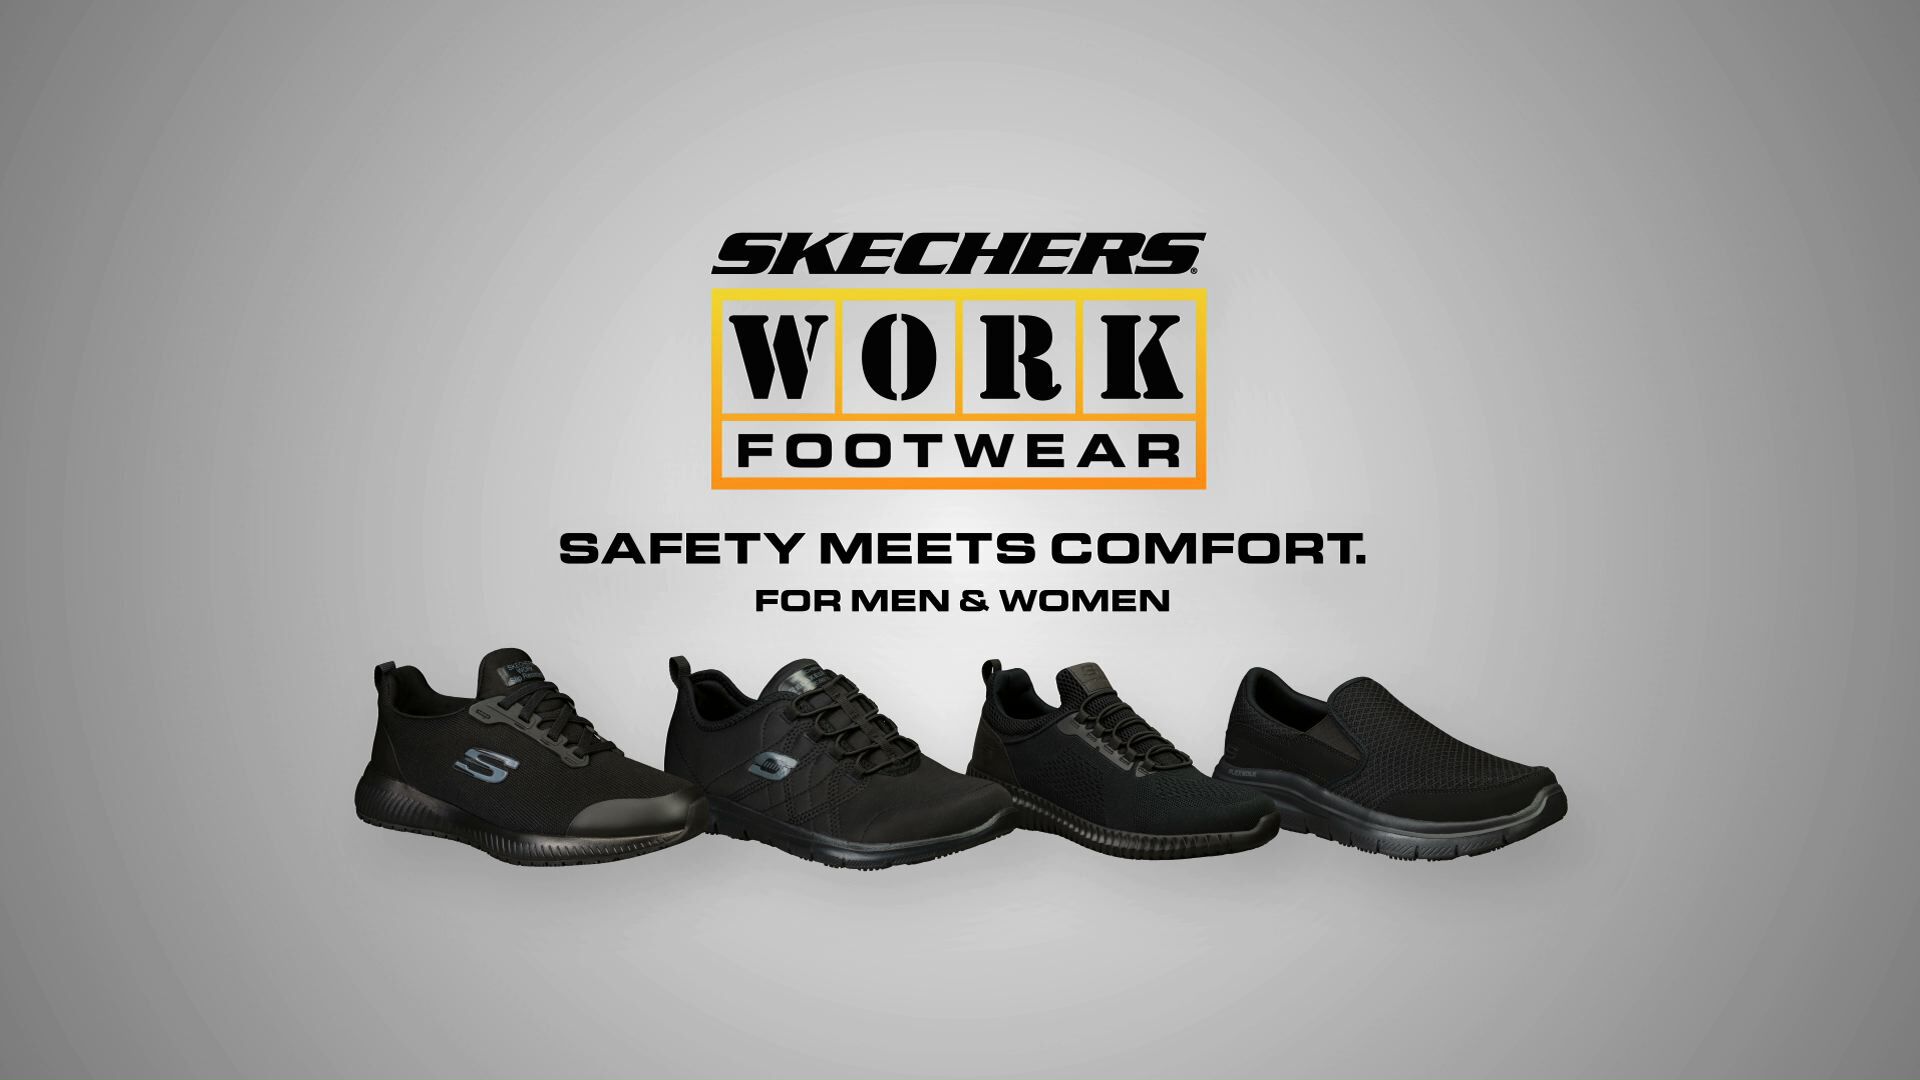 skechers new shoes commercial